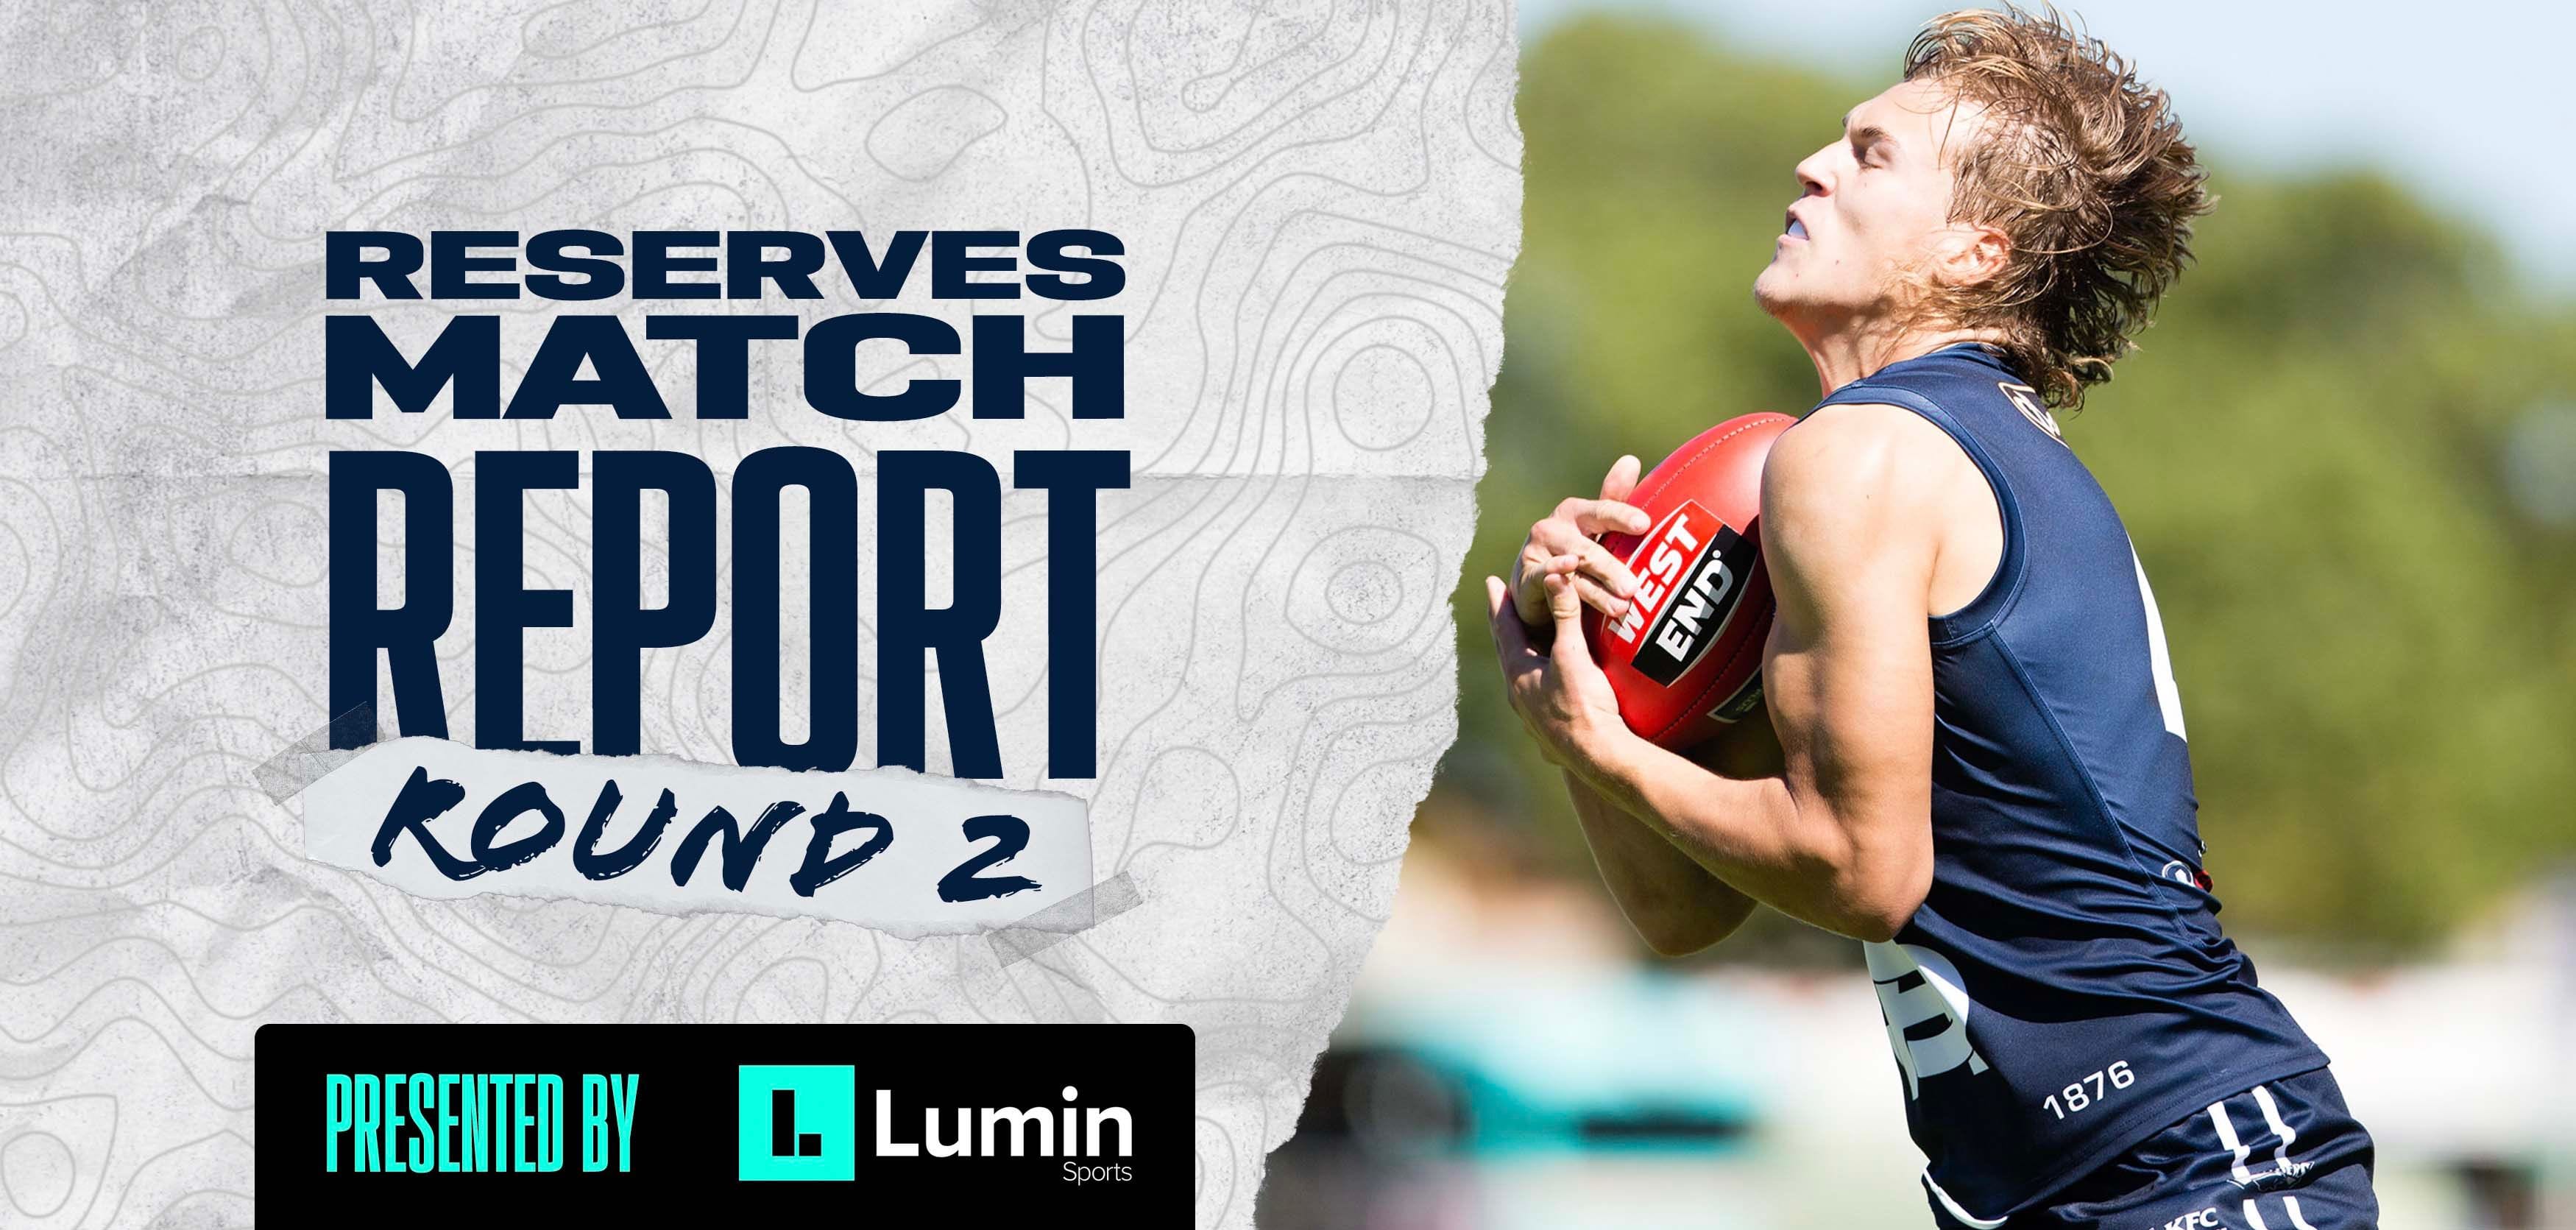 Lumin Sports Match Report: Reserves Round 2 vs North Adelaide